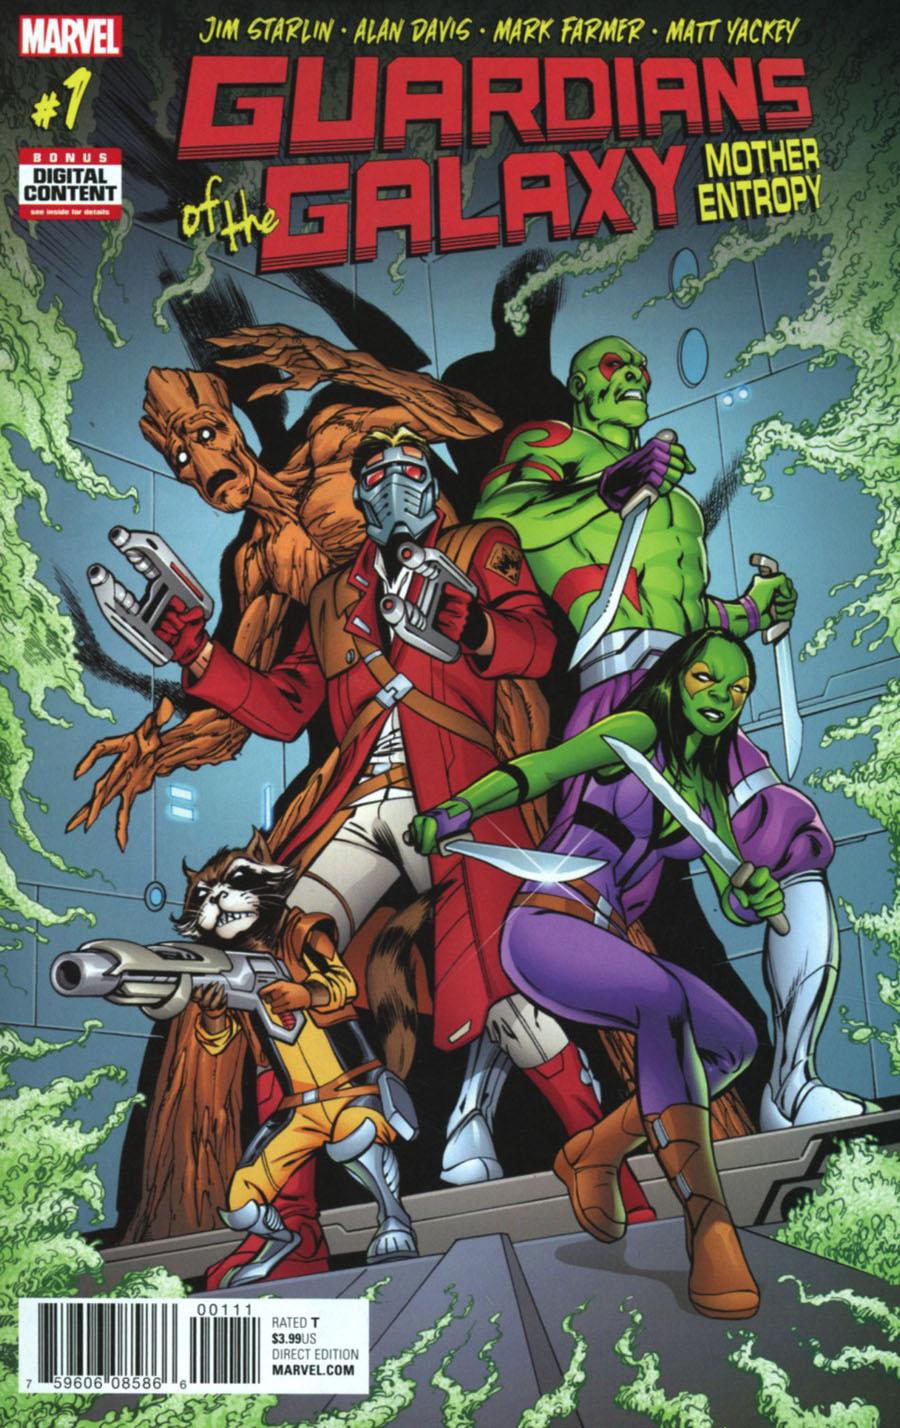 Guardians Of The Galaxy Mother Entropy Vol. 1 #1